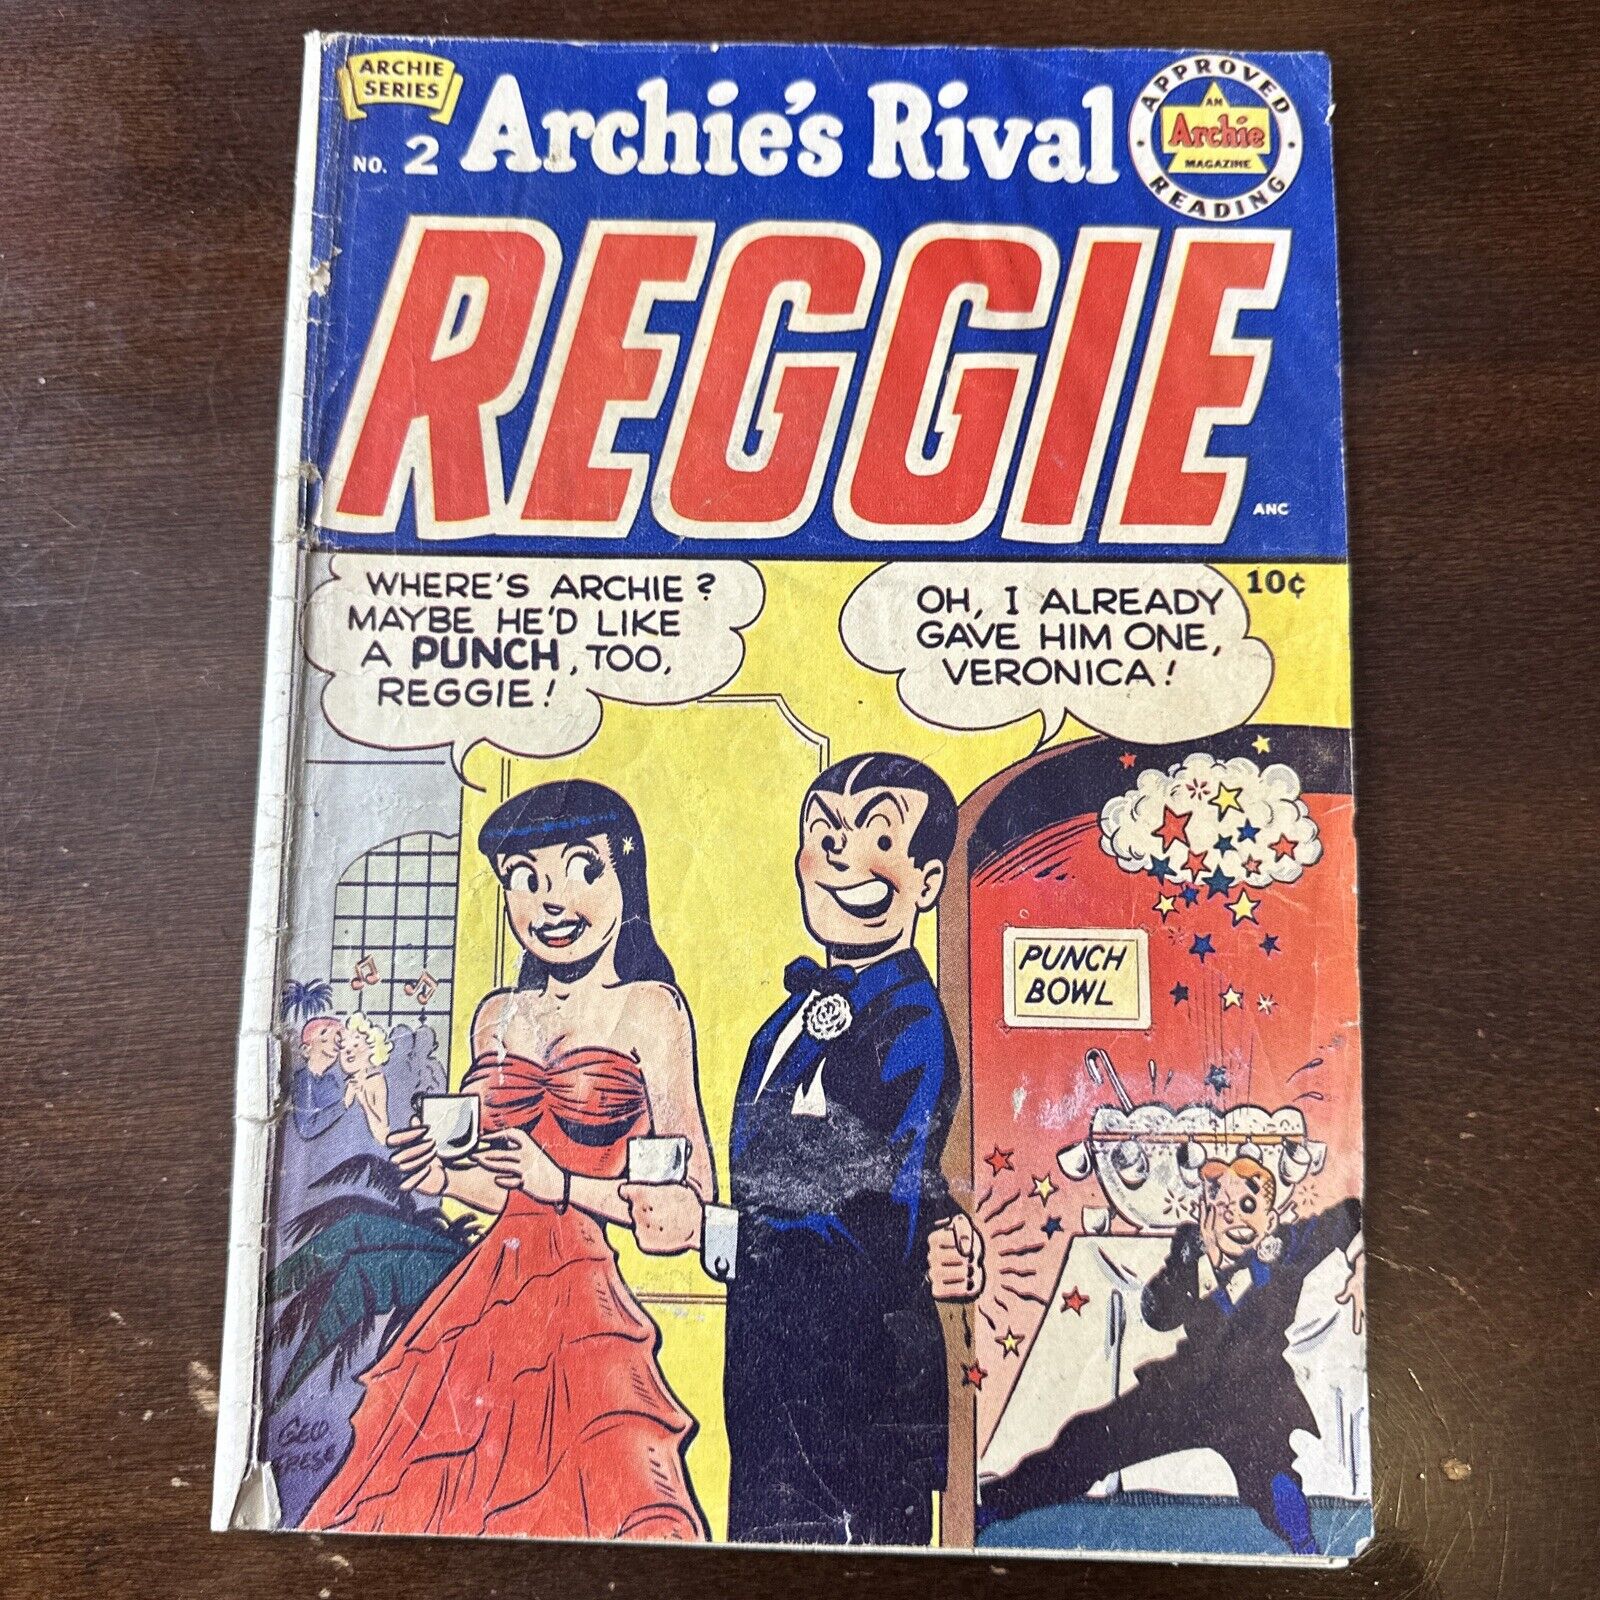 Archie's Rival Reggie #2 (1950) - Veronica and Archie Cover Golden Age